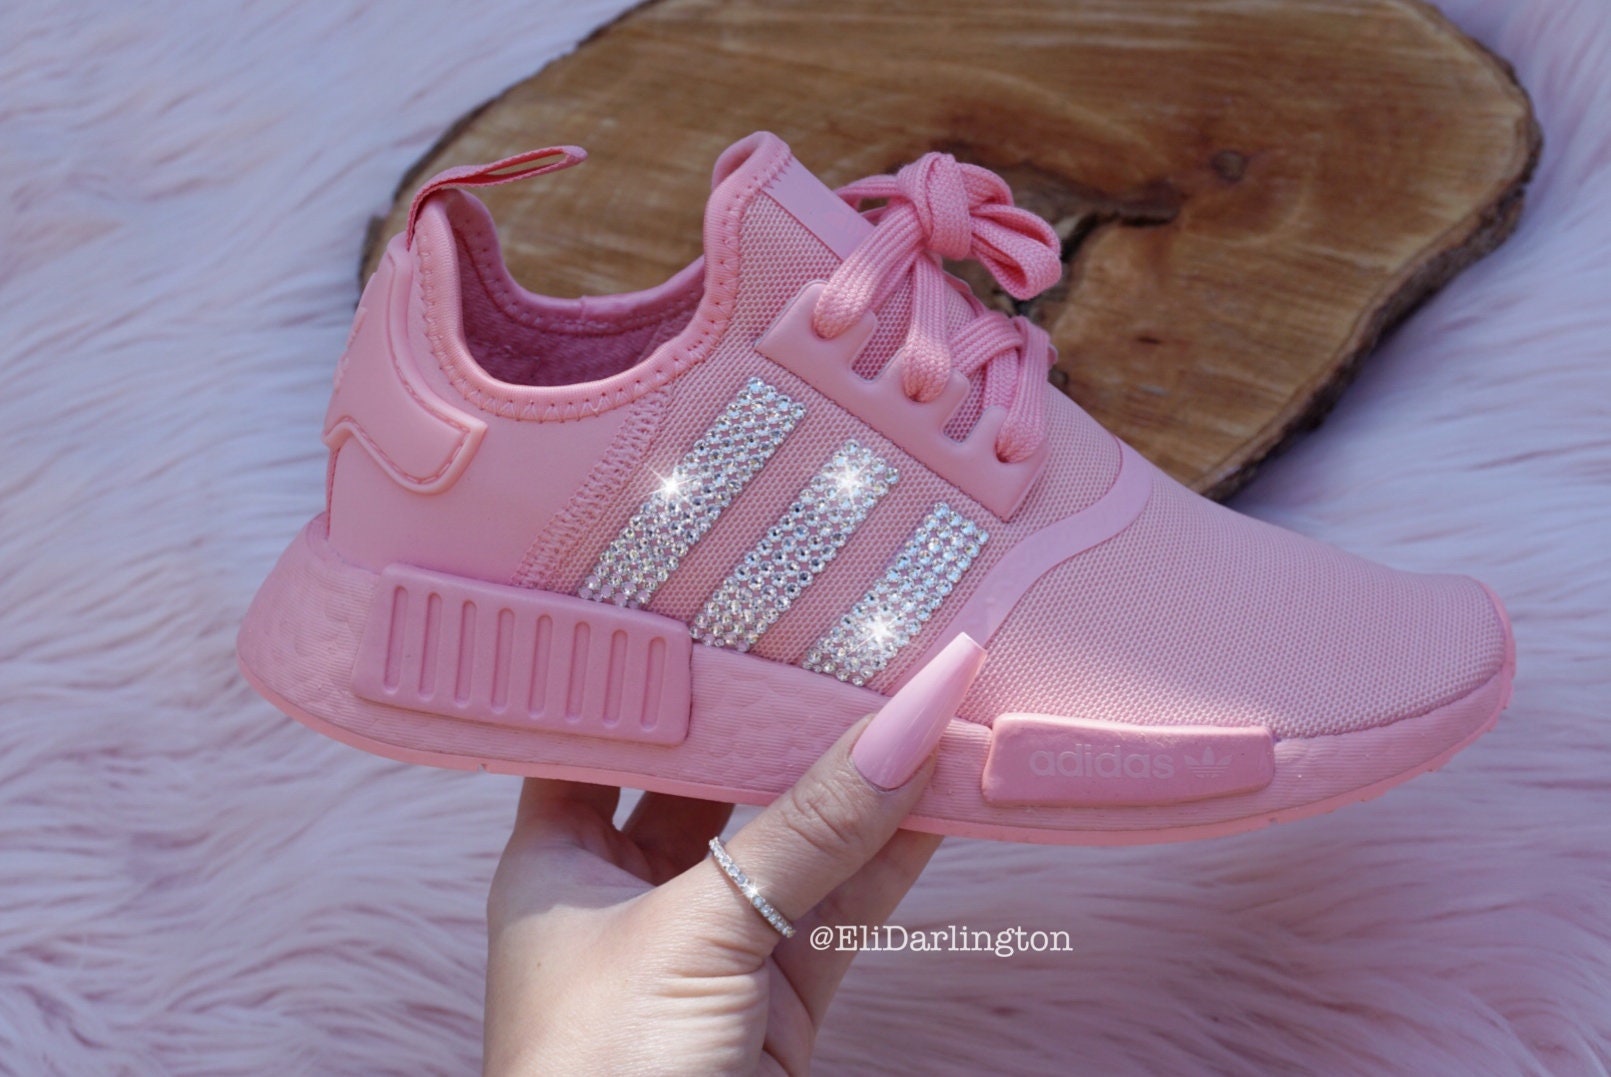 Women's Youth Pink NMD Shoes Silver Swarovski - Etsy